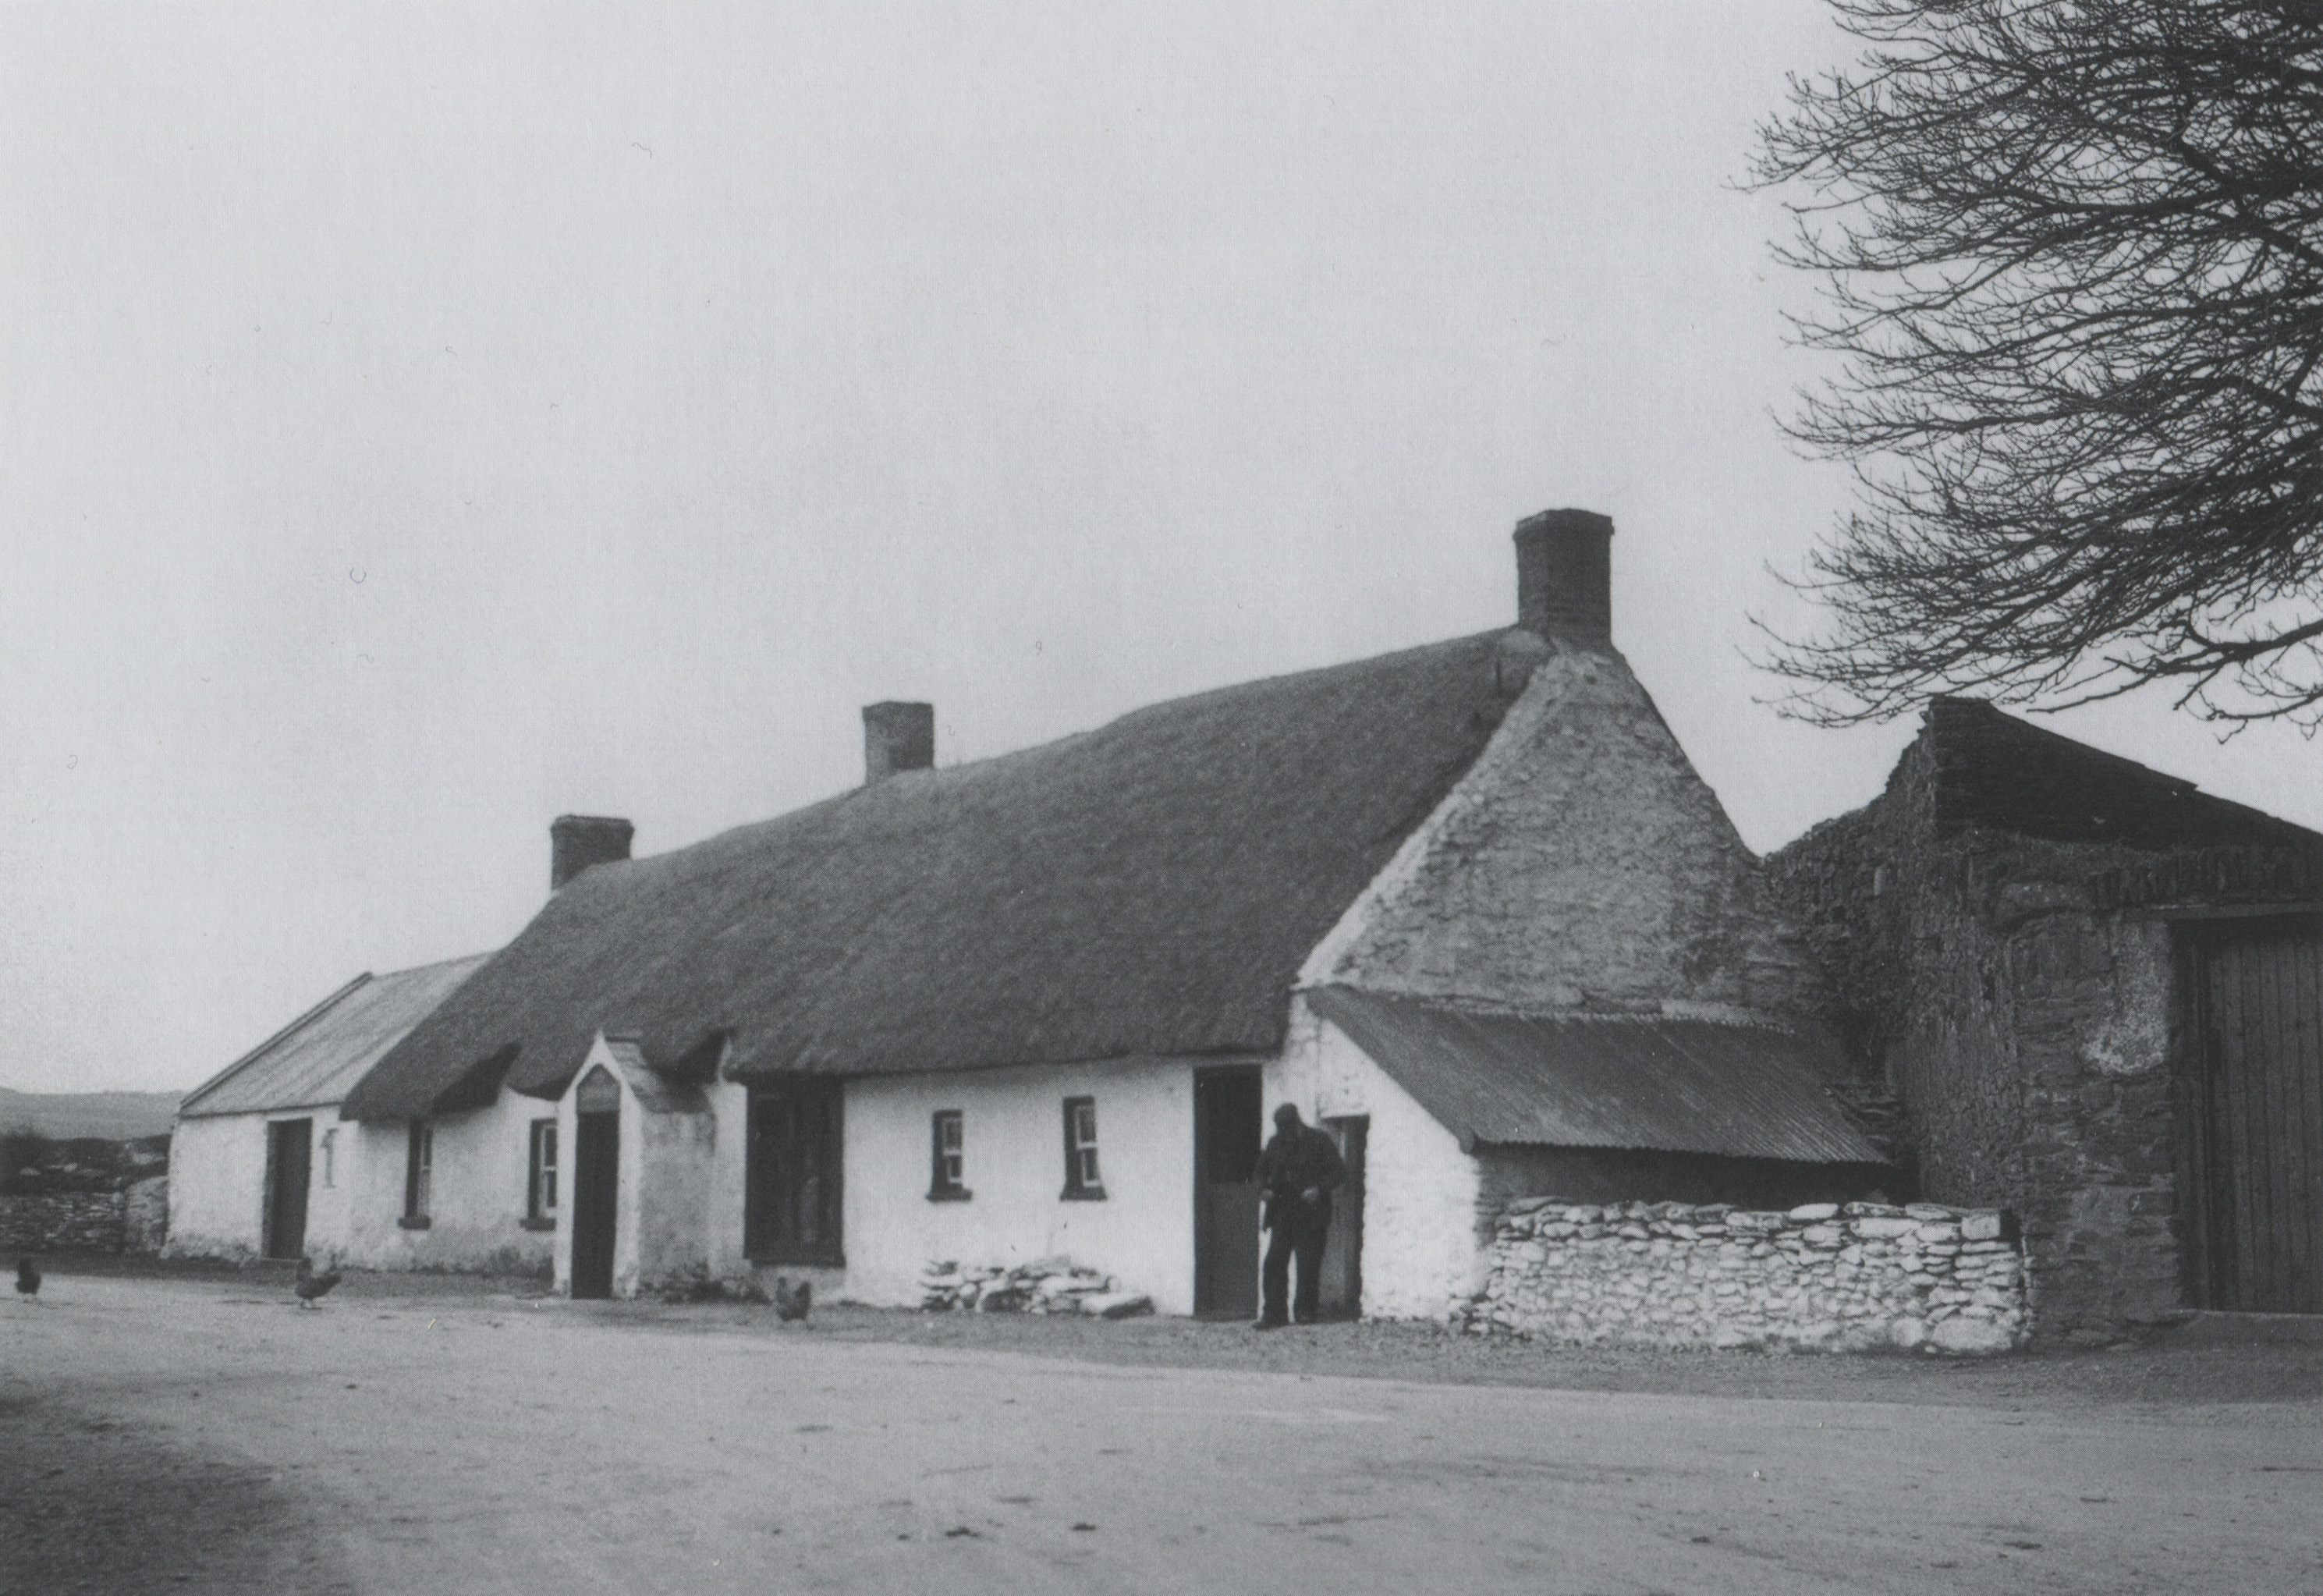 Thatched public house. Tall chimneys and low gables, along with the absence of súgán ropes, indicate that this is an inland location.